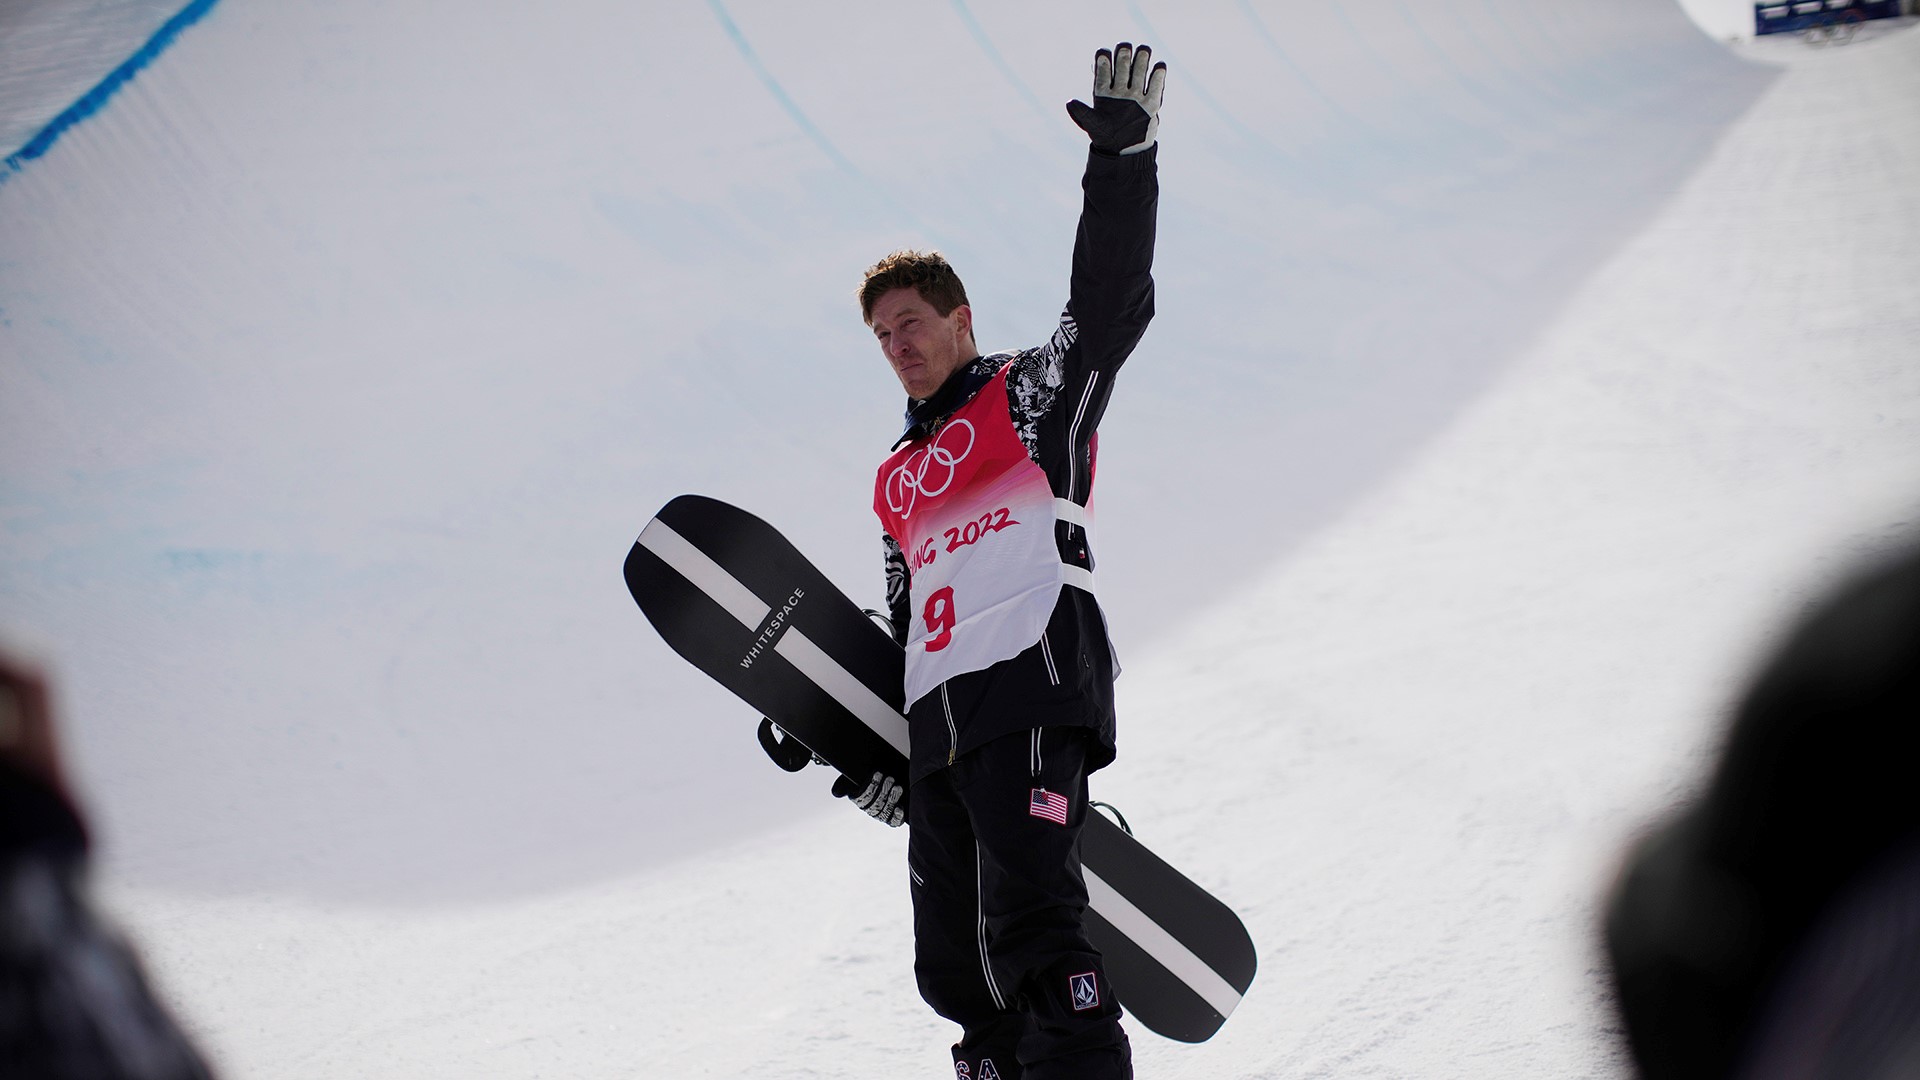 Shaun White Hailed The 'GOAT' After He Doesn't Medal In Final